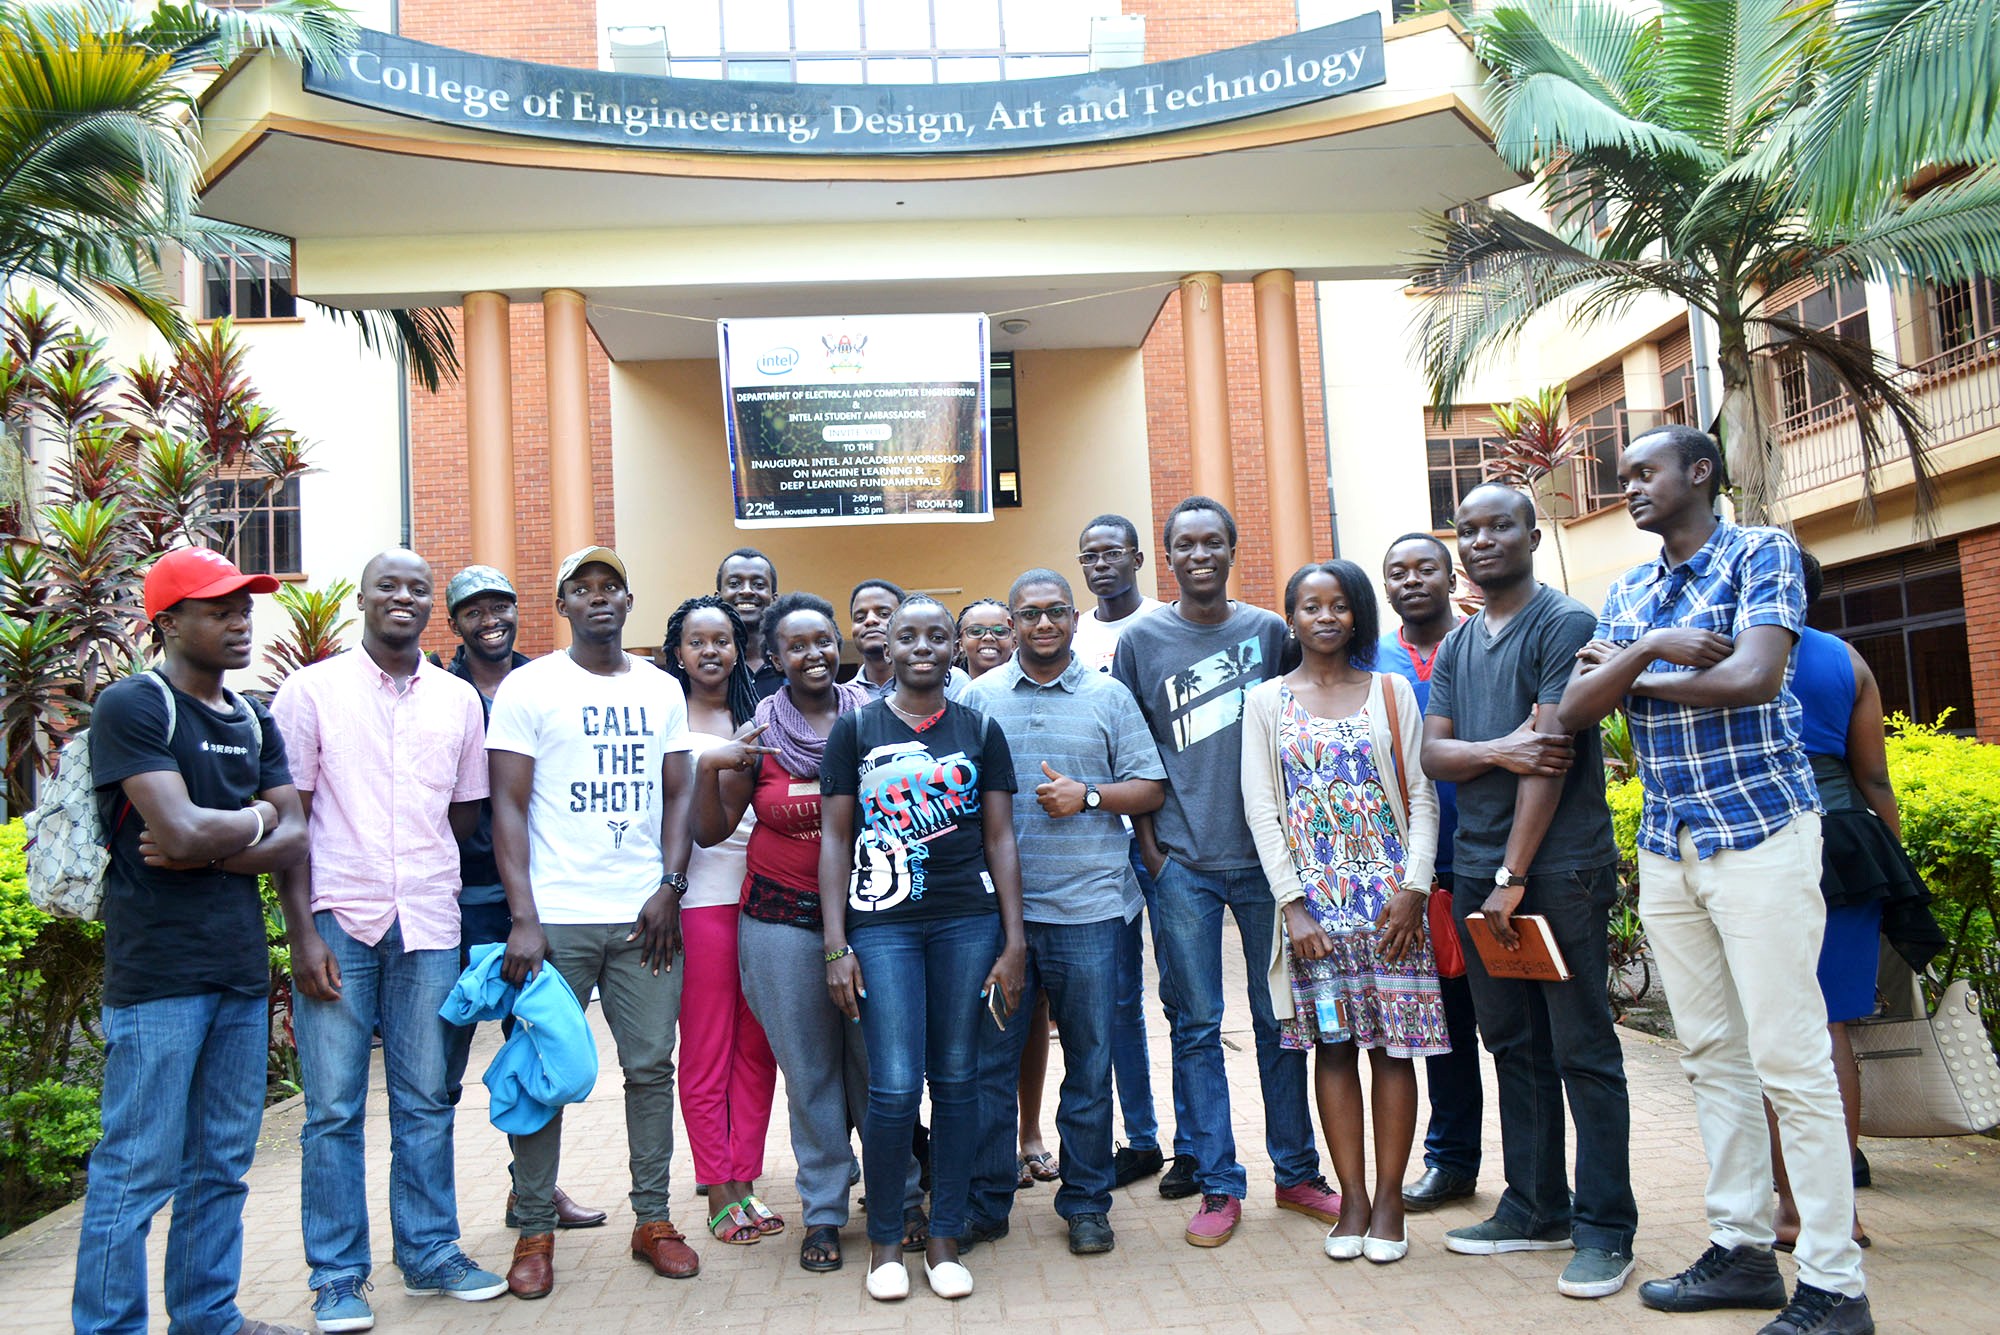 Some of the students that took part in the Inaugural Intel AI Academy Workshop on Machine Learning and Deep Learning Fundamentals pose for a photo on 22nd November 2019, CEDAT, Makerere University.